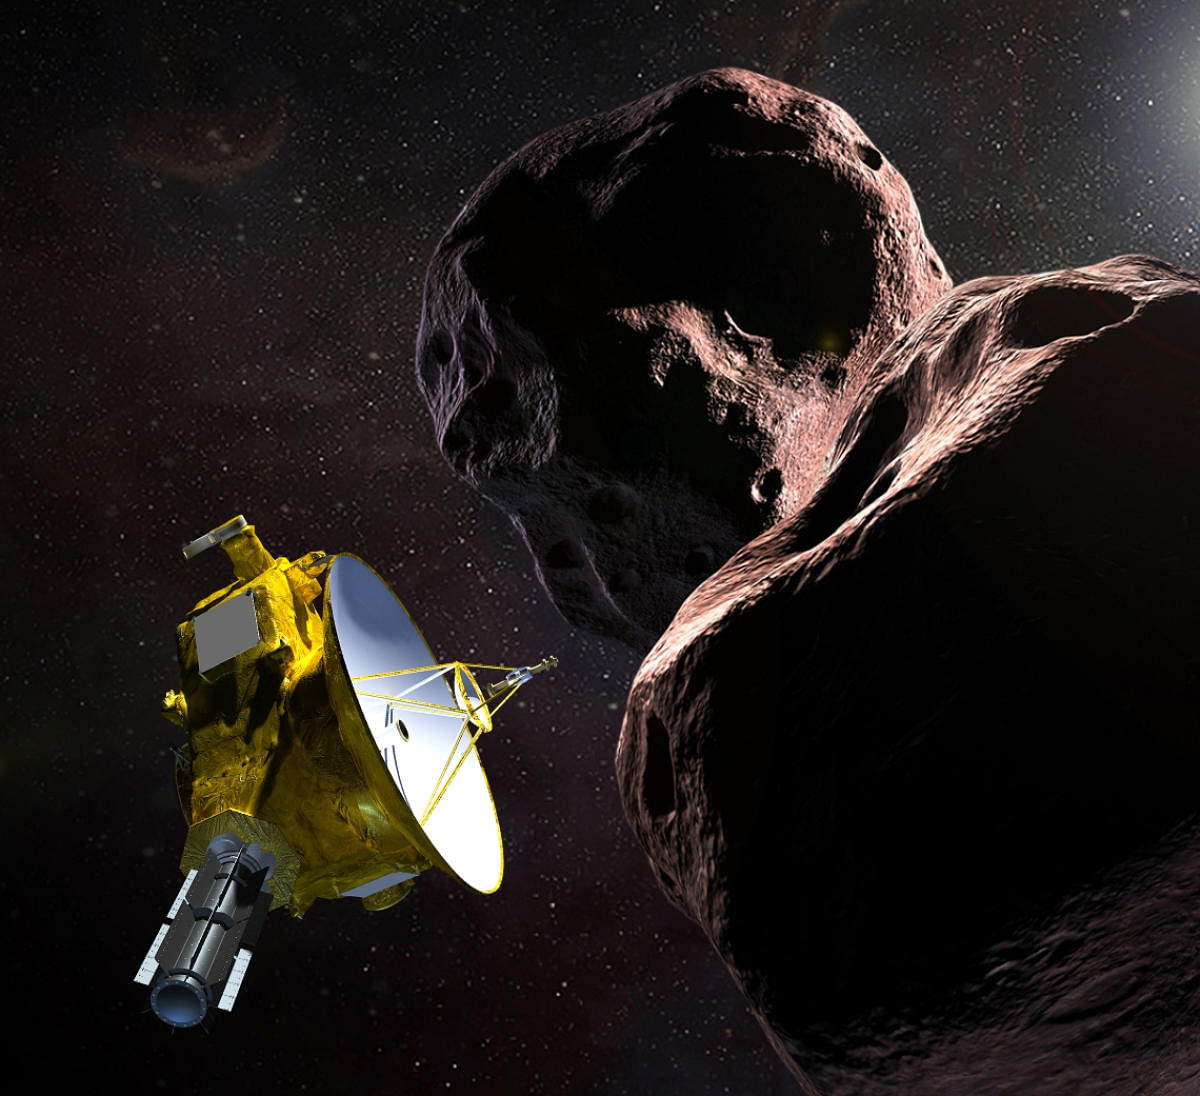 This artist's illustration obtained from NASA on December 21, 2018 shows the New Horizons spacecraft encountering 2014 MU69 – nicknamed “Ultima Thule” – a Kuiper Belt object that orbits one billion miles beyond Pluto. (AFP file photo)